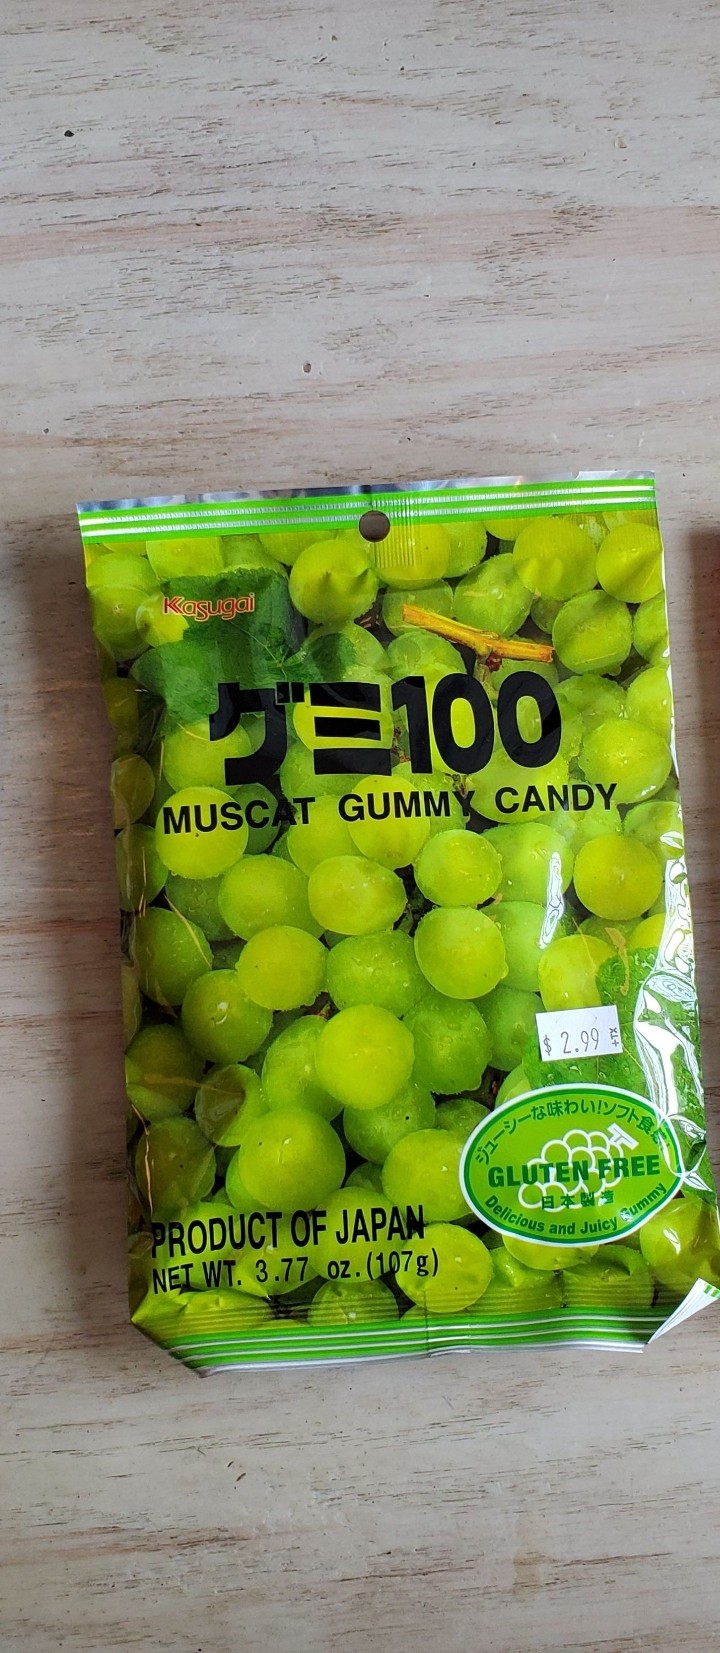 A3 Muscat Gummy Candy